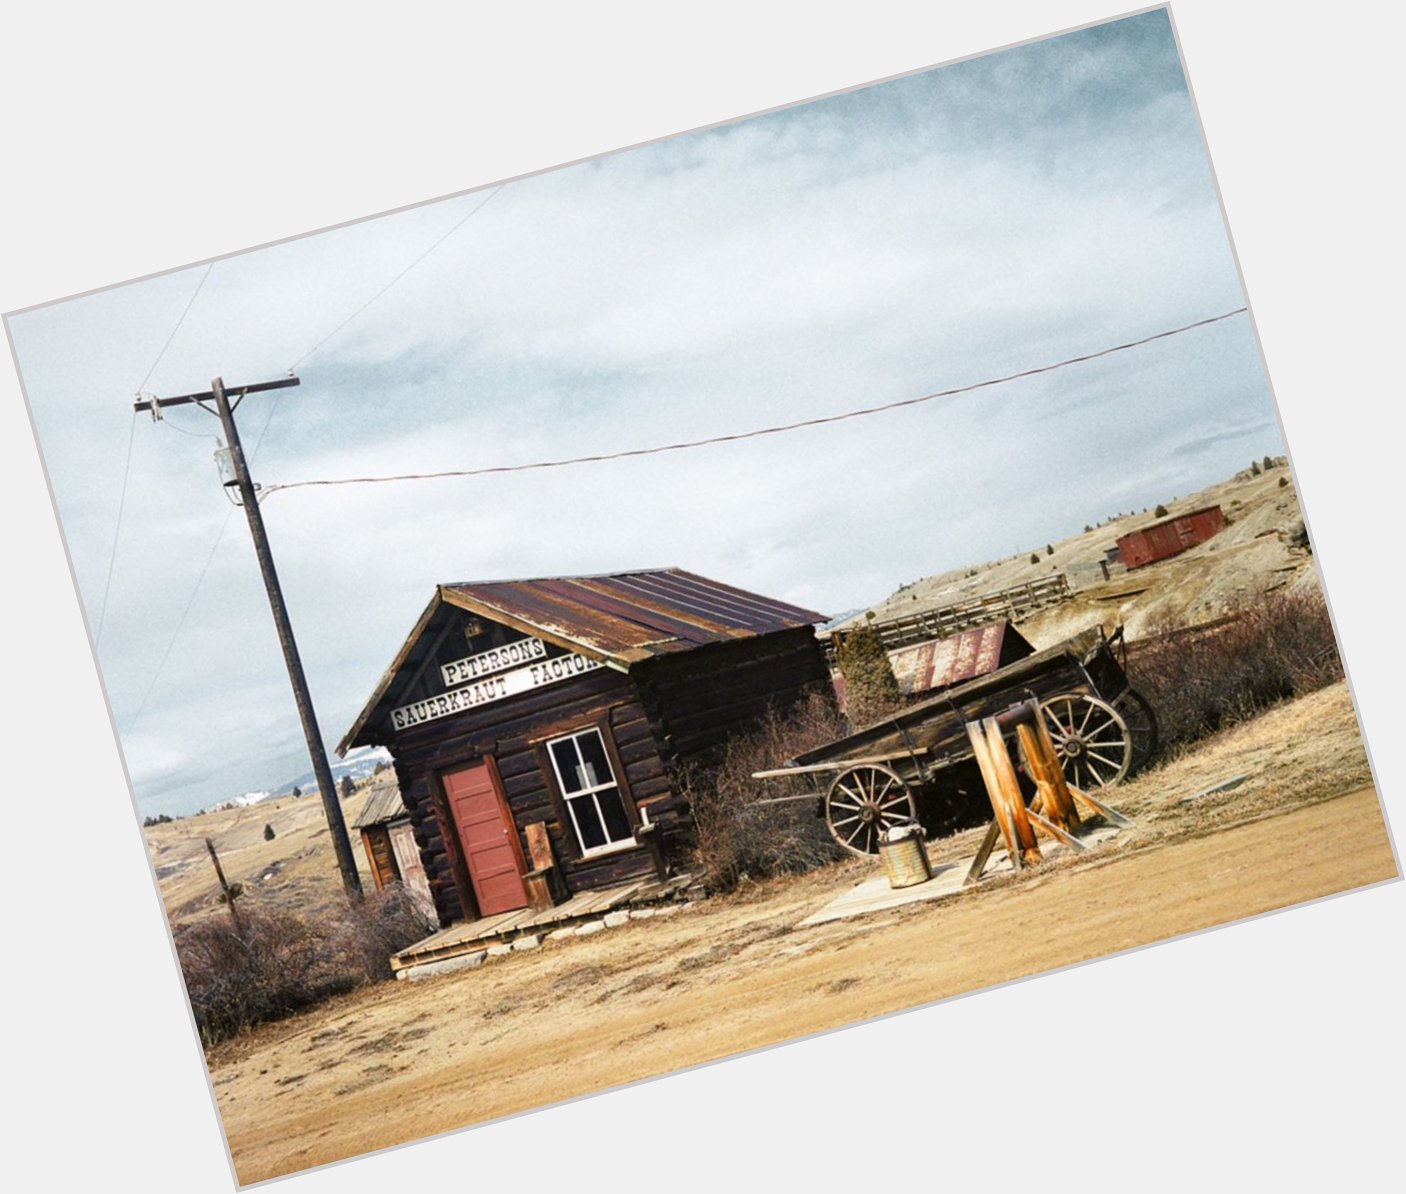 Wim Wenders, from the series, Time capsules at the side of the road. Happy Birthday, Mr. Wenders. 